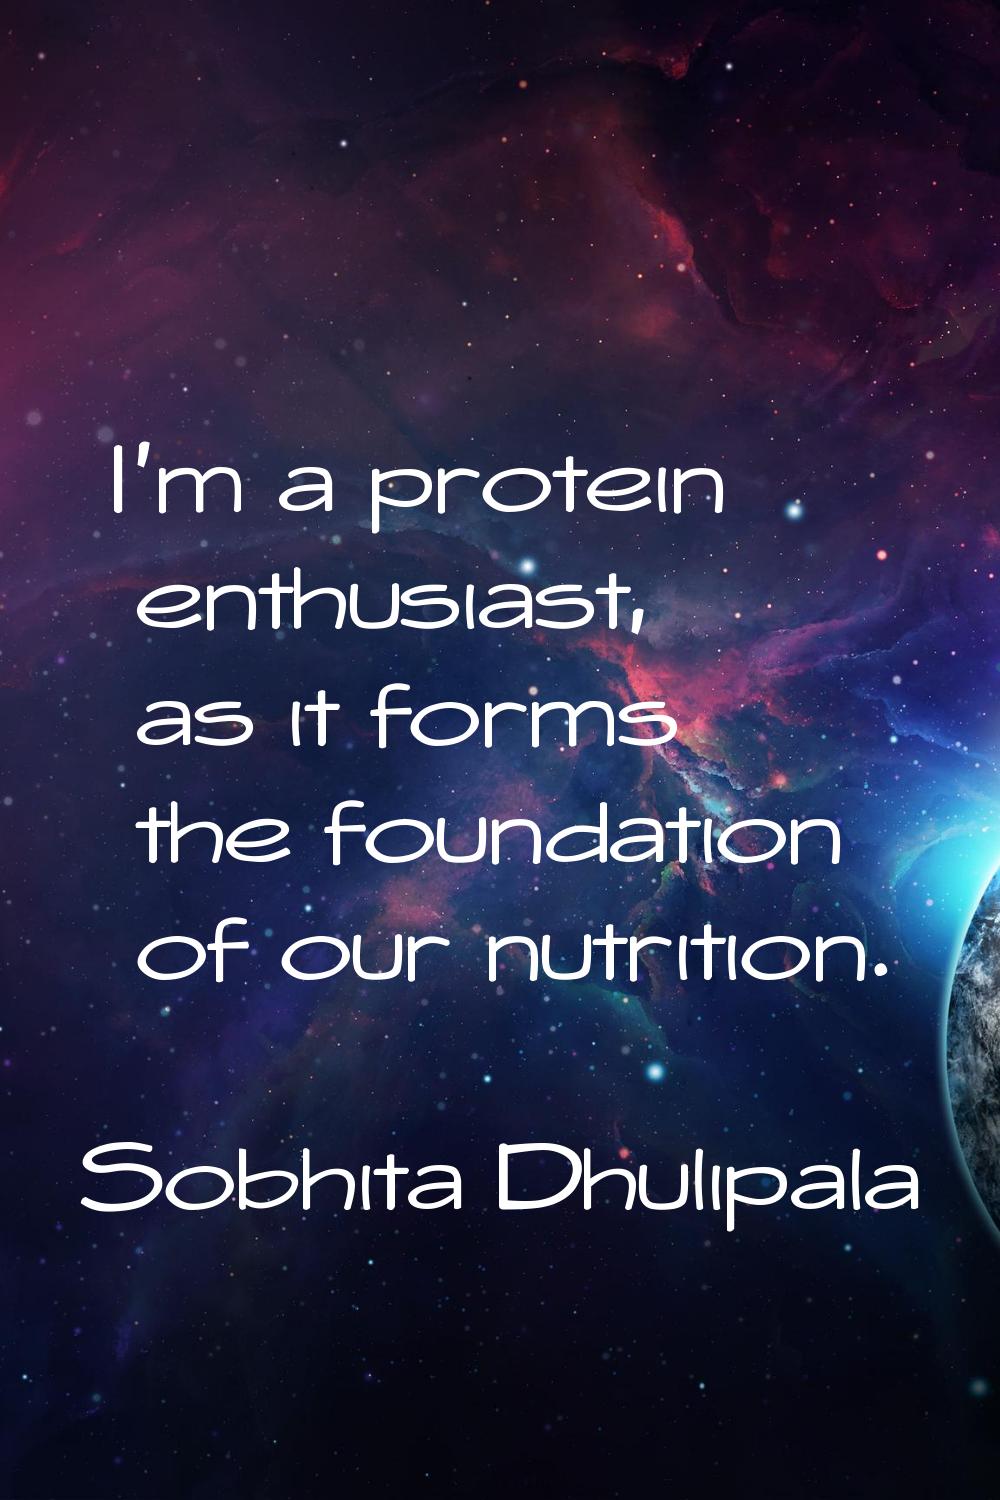 I'm a protein enthusiast, as it forms the foundation of our nutrition.